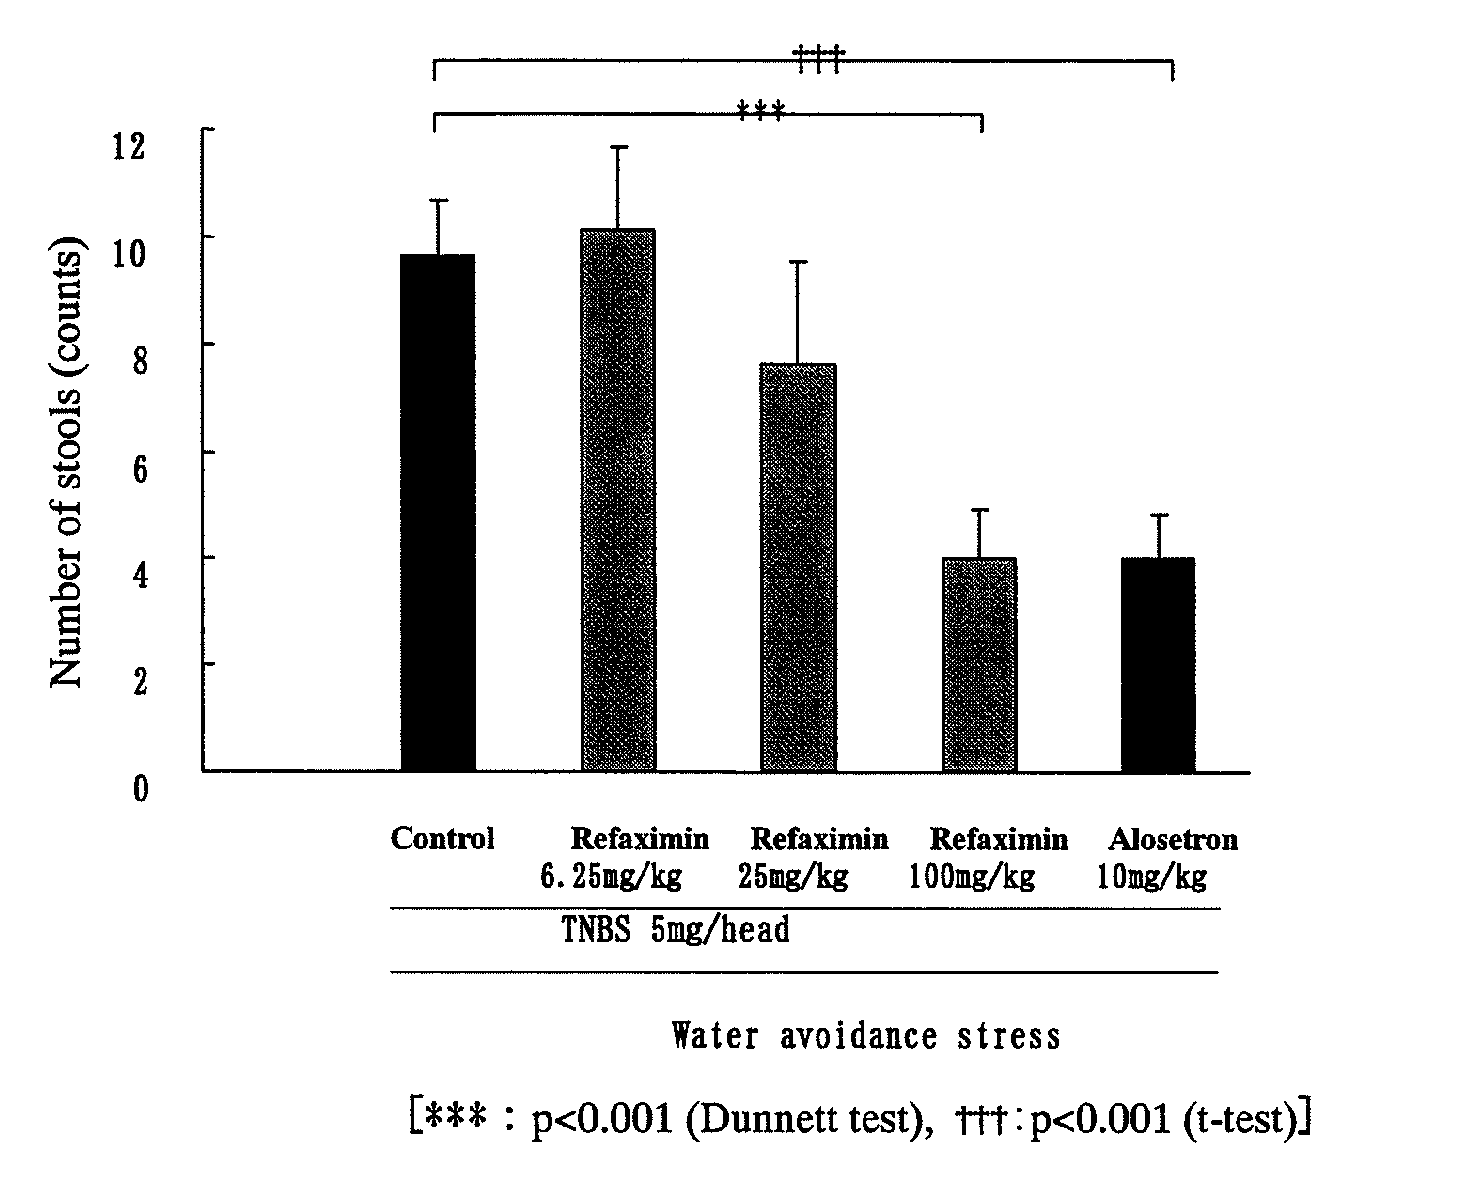 Agent for preventing and/or treating functional gastrointestinal disorder